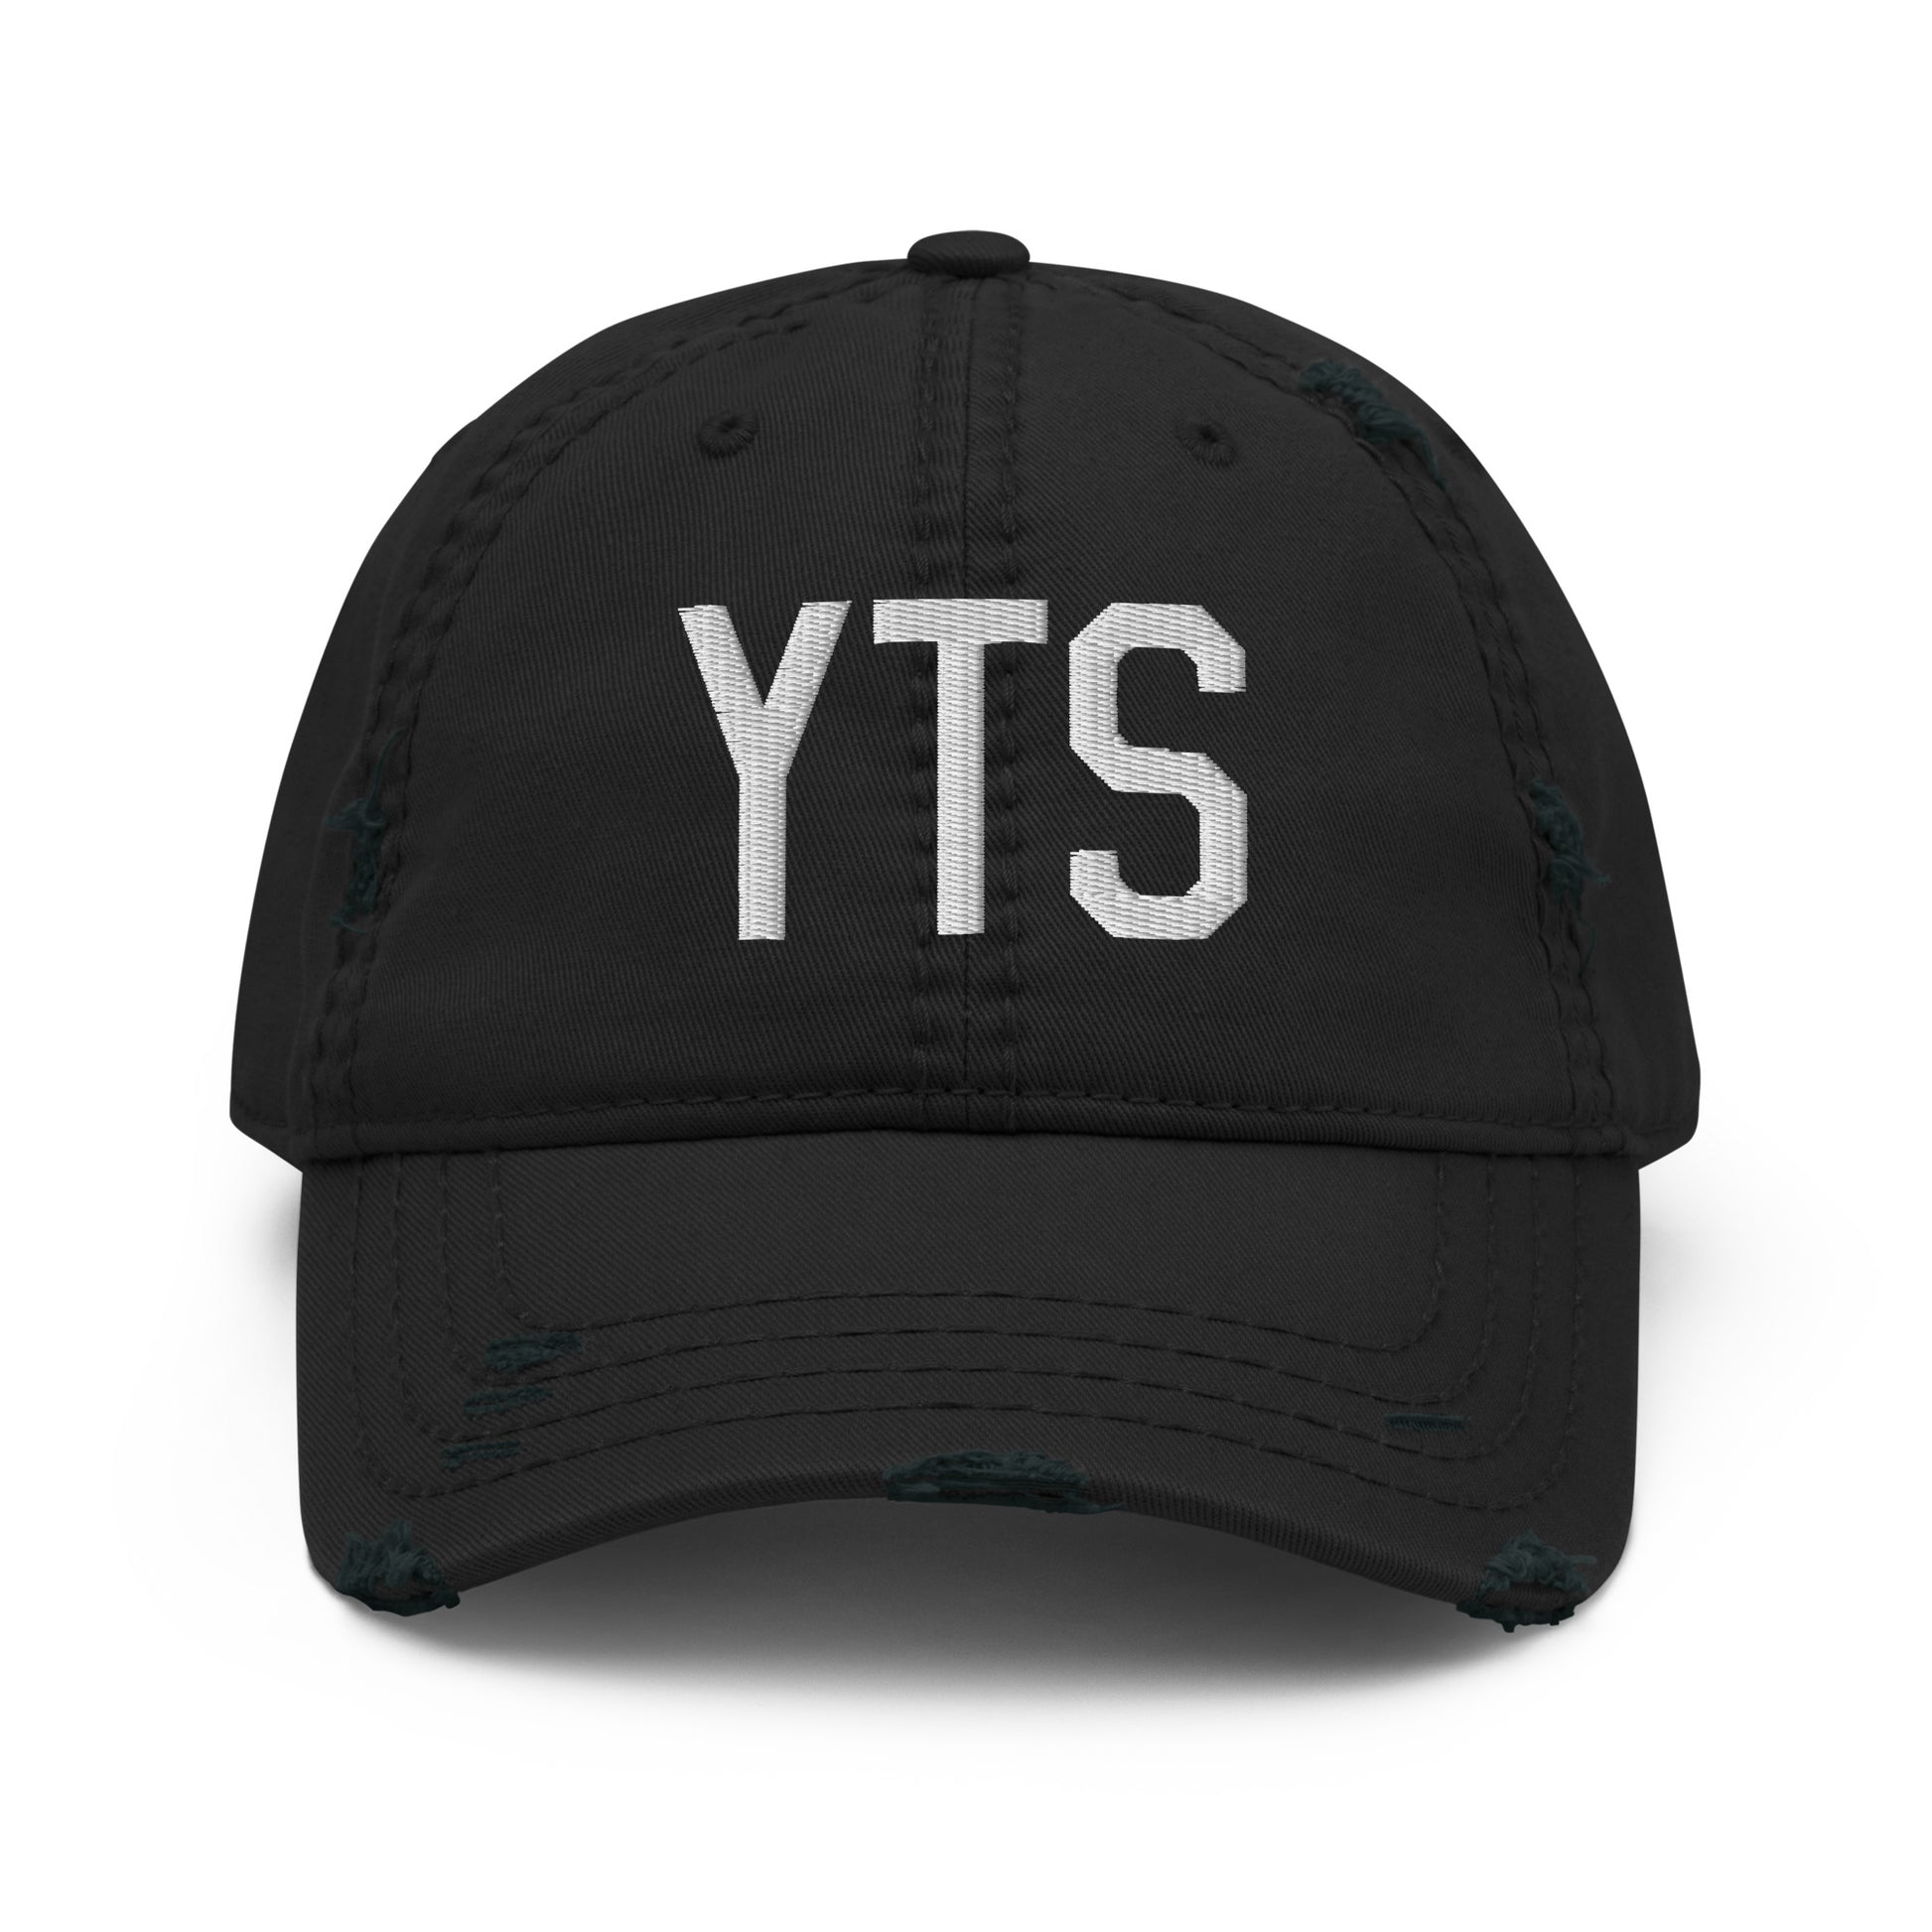 Airport Code Distressed Hat - White • YTS Timmins • YHM Designs - Image 10